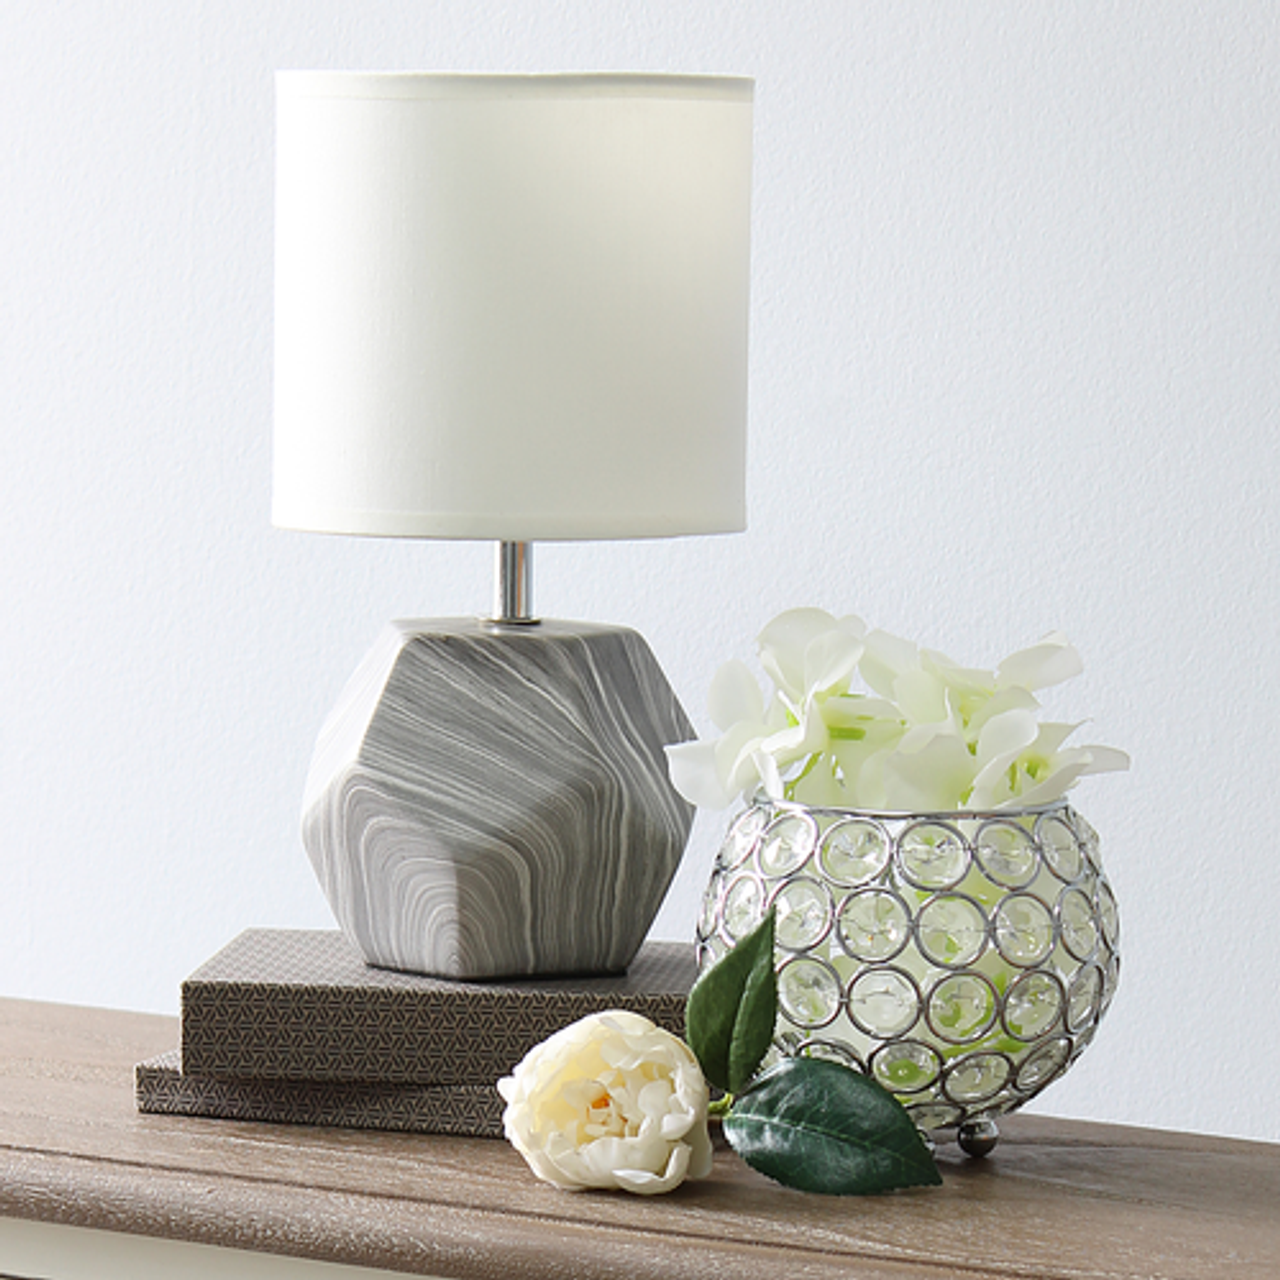 Simple Designs Round Prism Mini Table Lamp with White Fabric Shade - Marbled